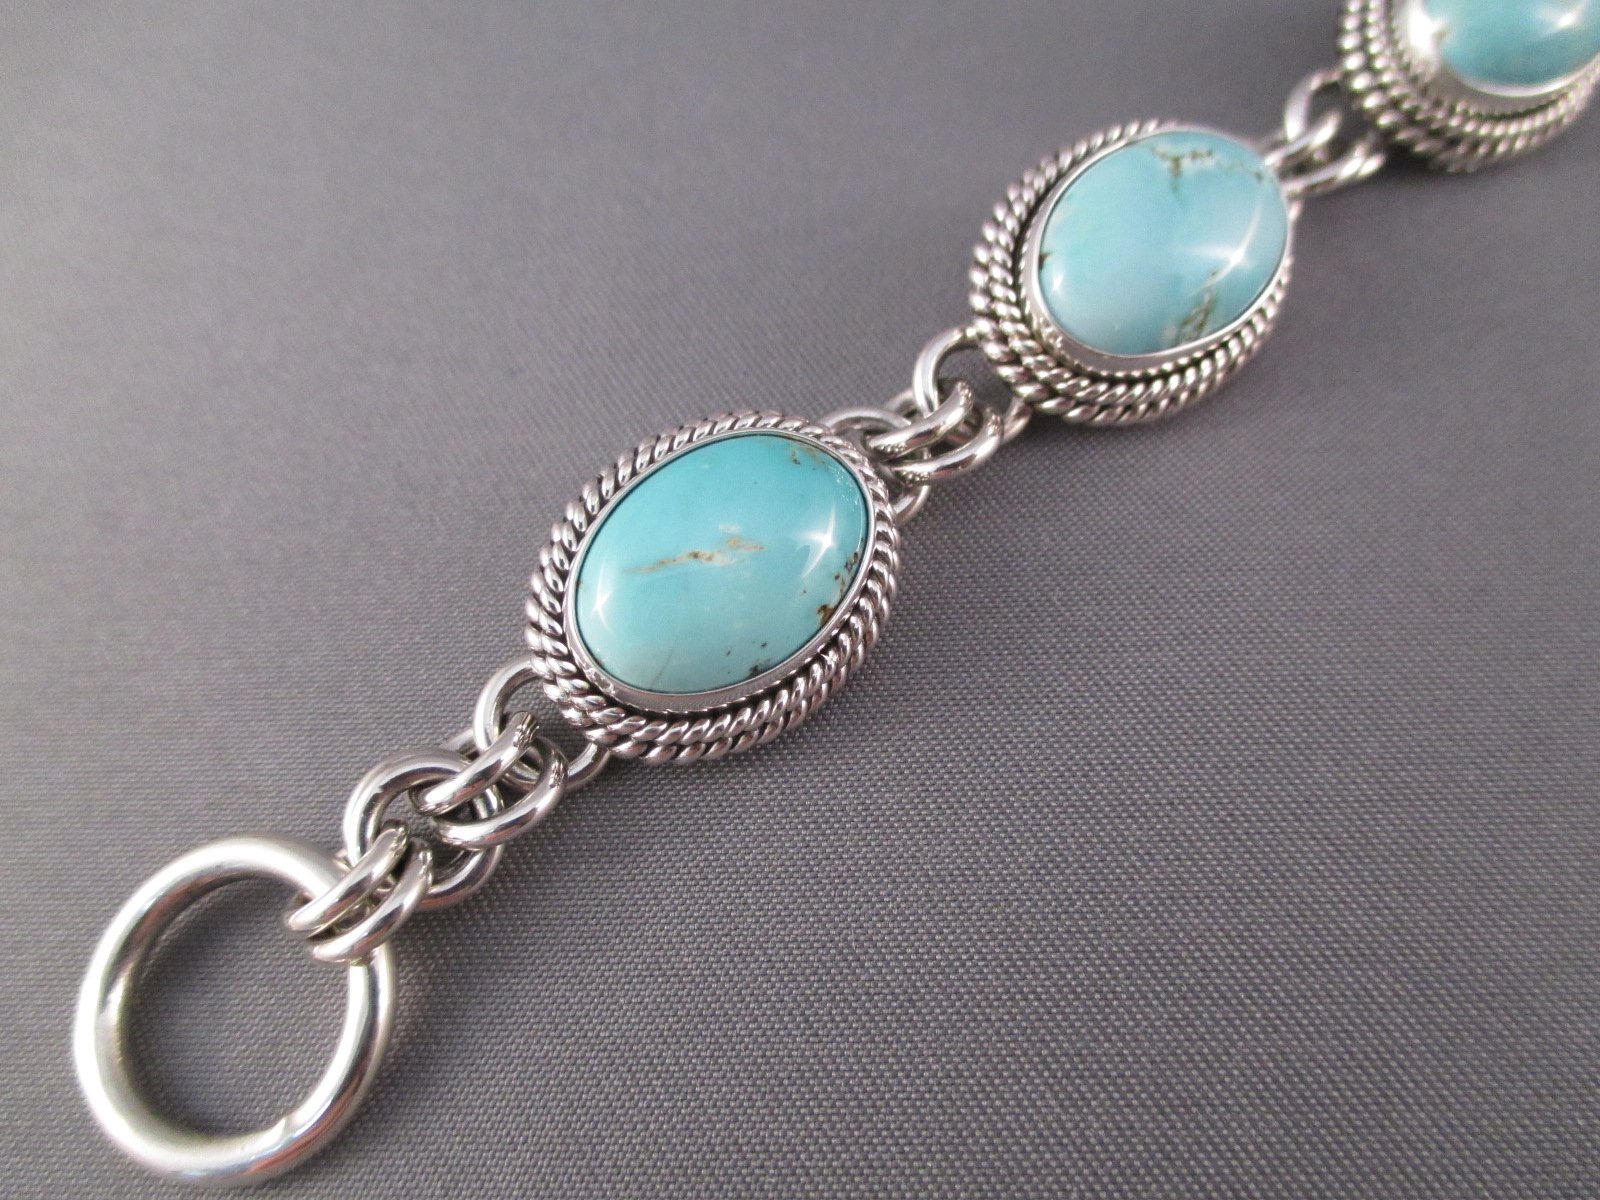 Artie Yellowhorse Link Bracelet with Carico Lake Turquoise